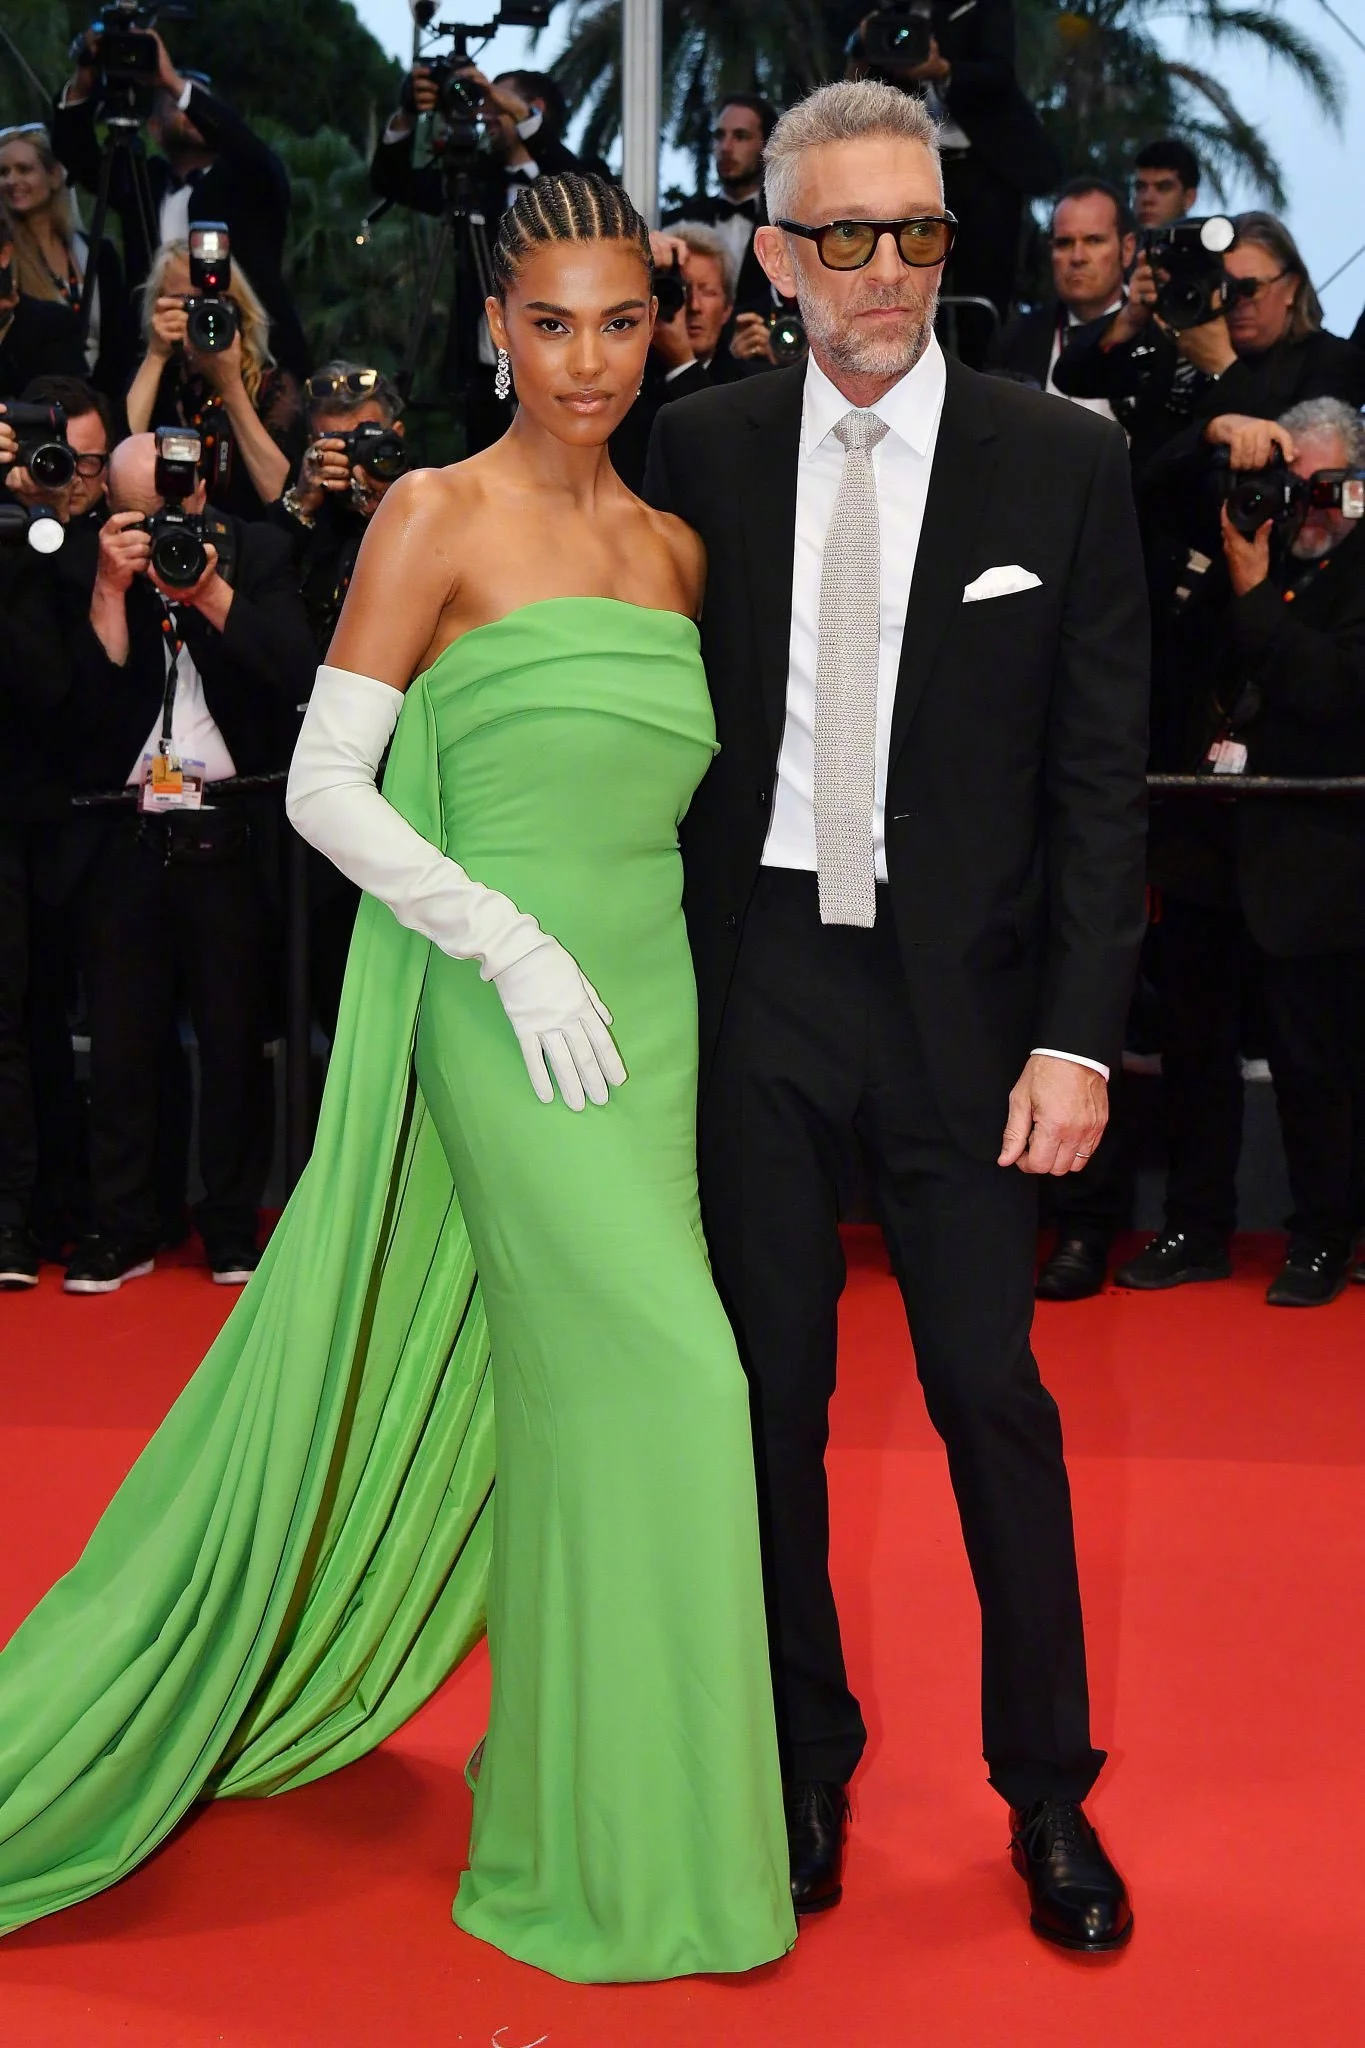 Vincent Cassel and Tina Kunakey at the premiere of "Crimes of the Future‎"